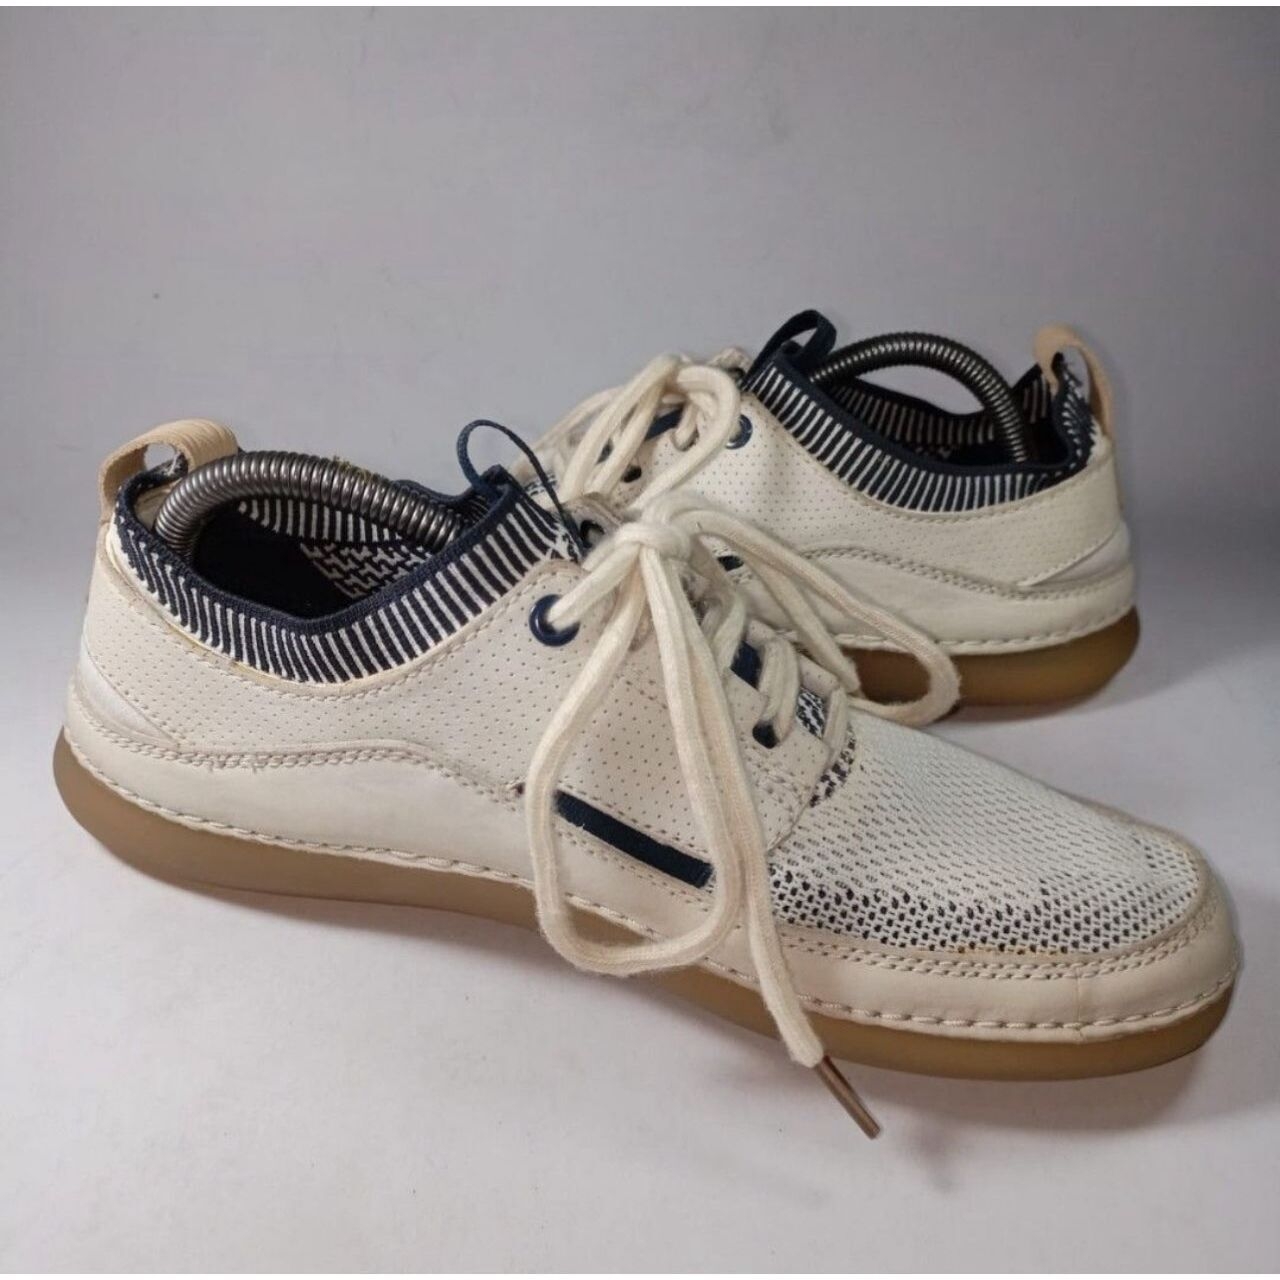 Clarks Nature White Cream Leather Textile Lace Up Casual Comfort